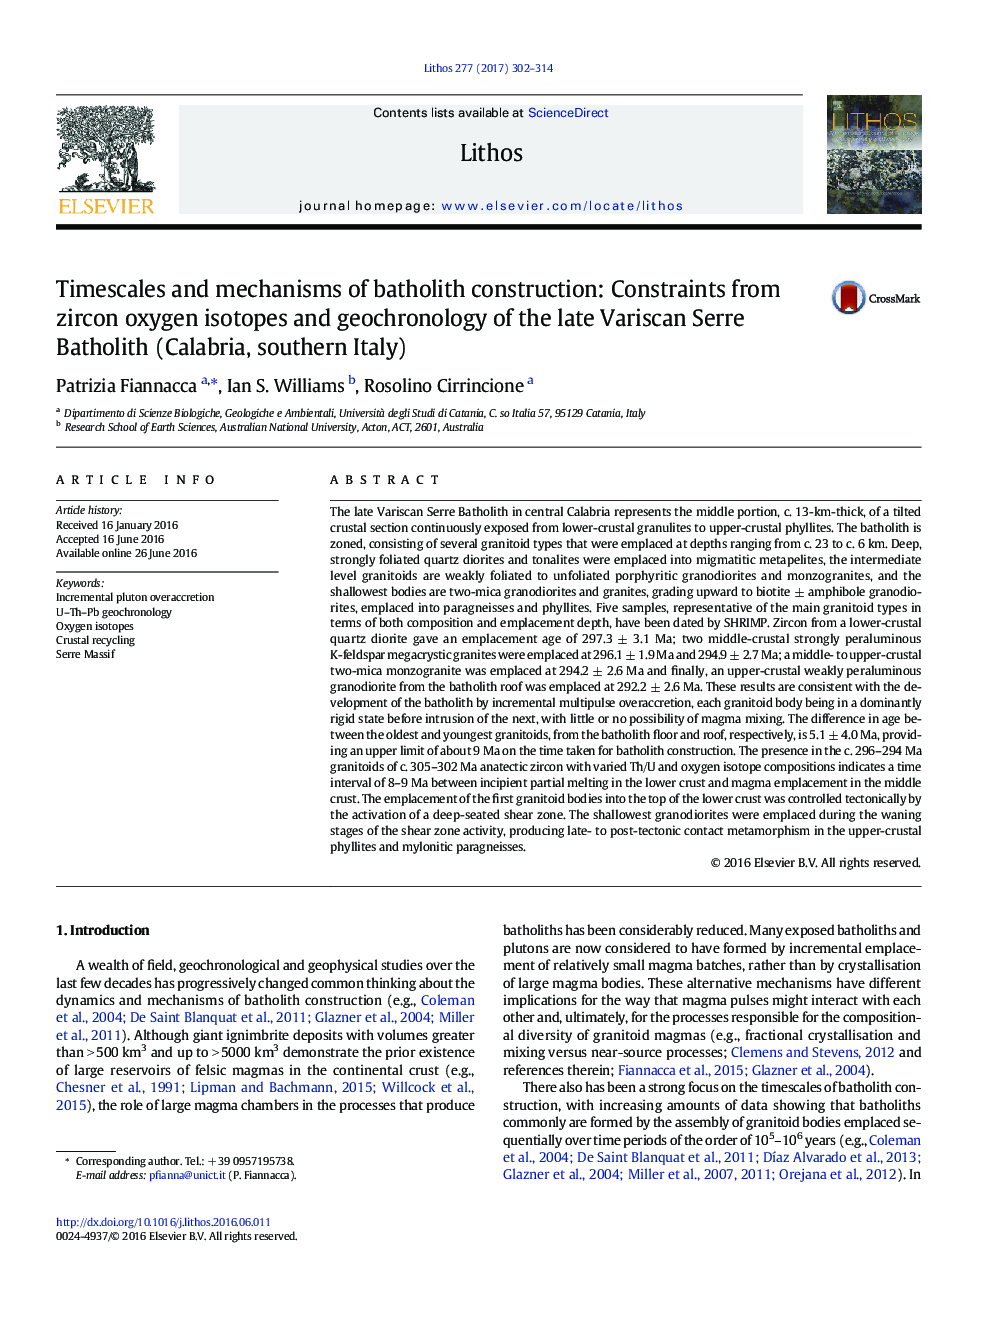 Timescales and mechanisms of batholith construction: Constraints from zircon oxygen isotopes and geochronology of the late Variscan Serre Batholith (Calabria, southern Italy)